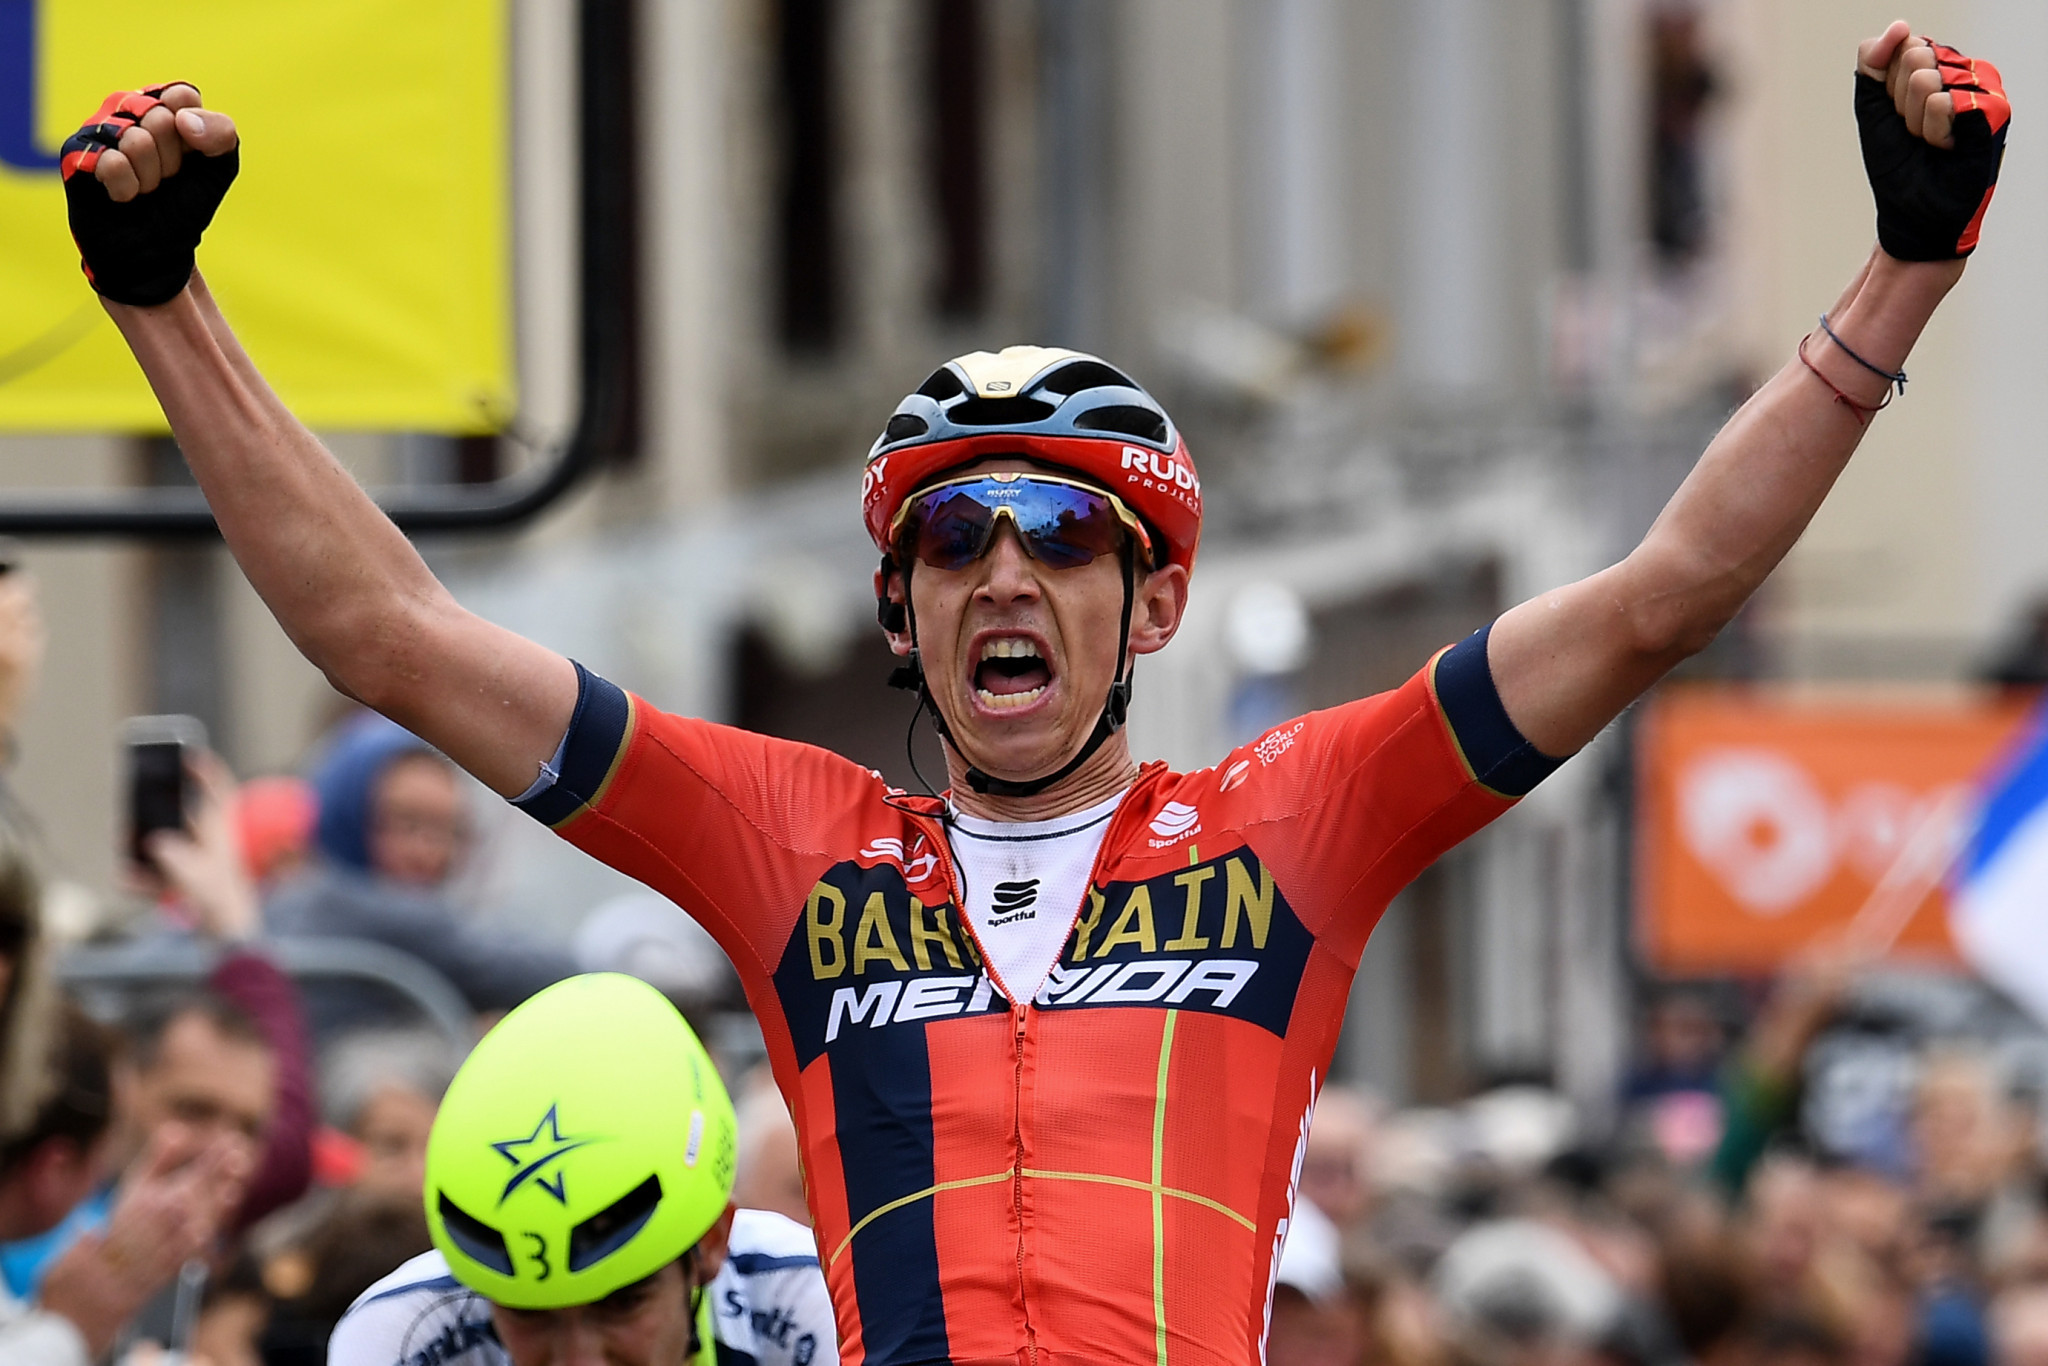 Bahrain-Merida rider Dylan Teuns of Belgium won stage two of the Critérium du Dauphiné ©Getty Images